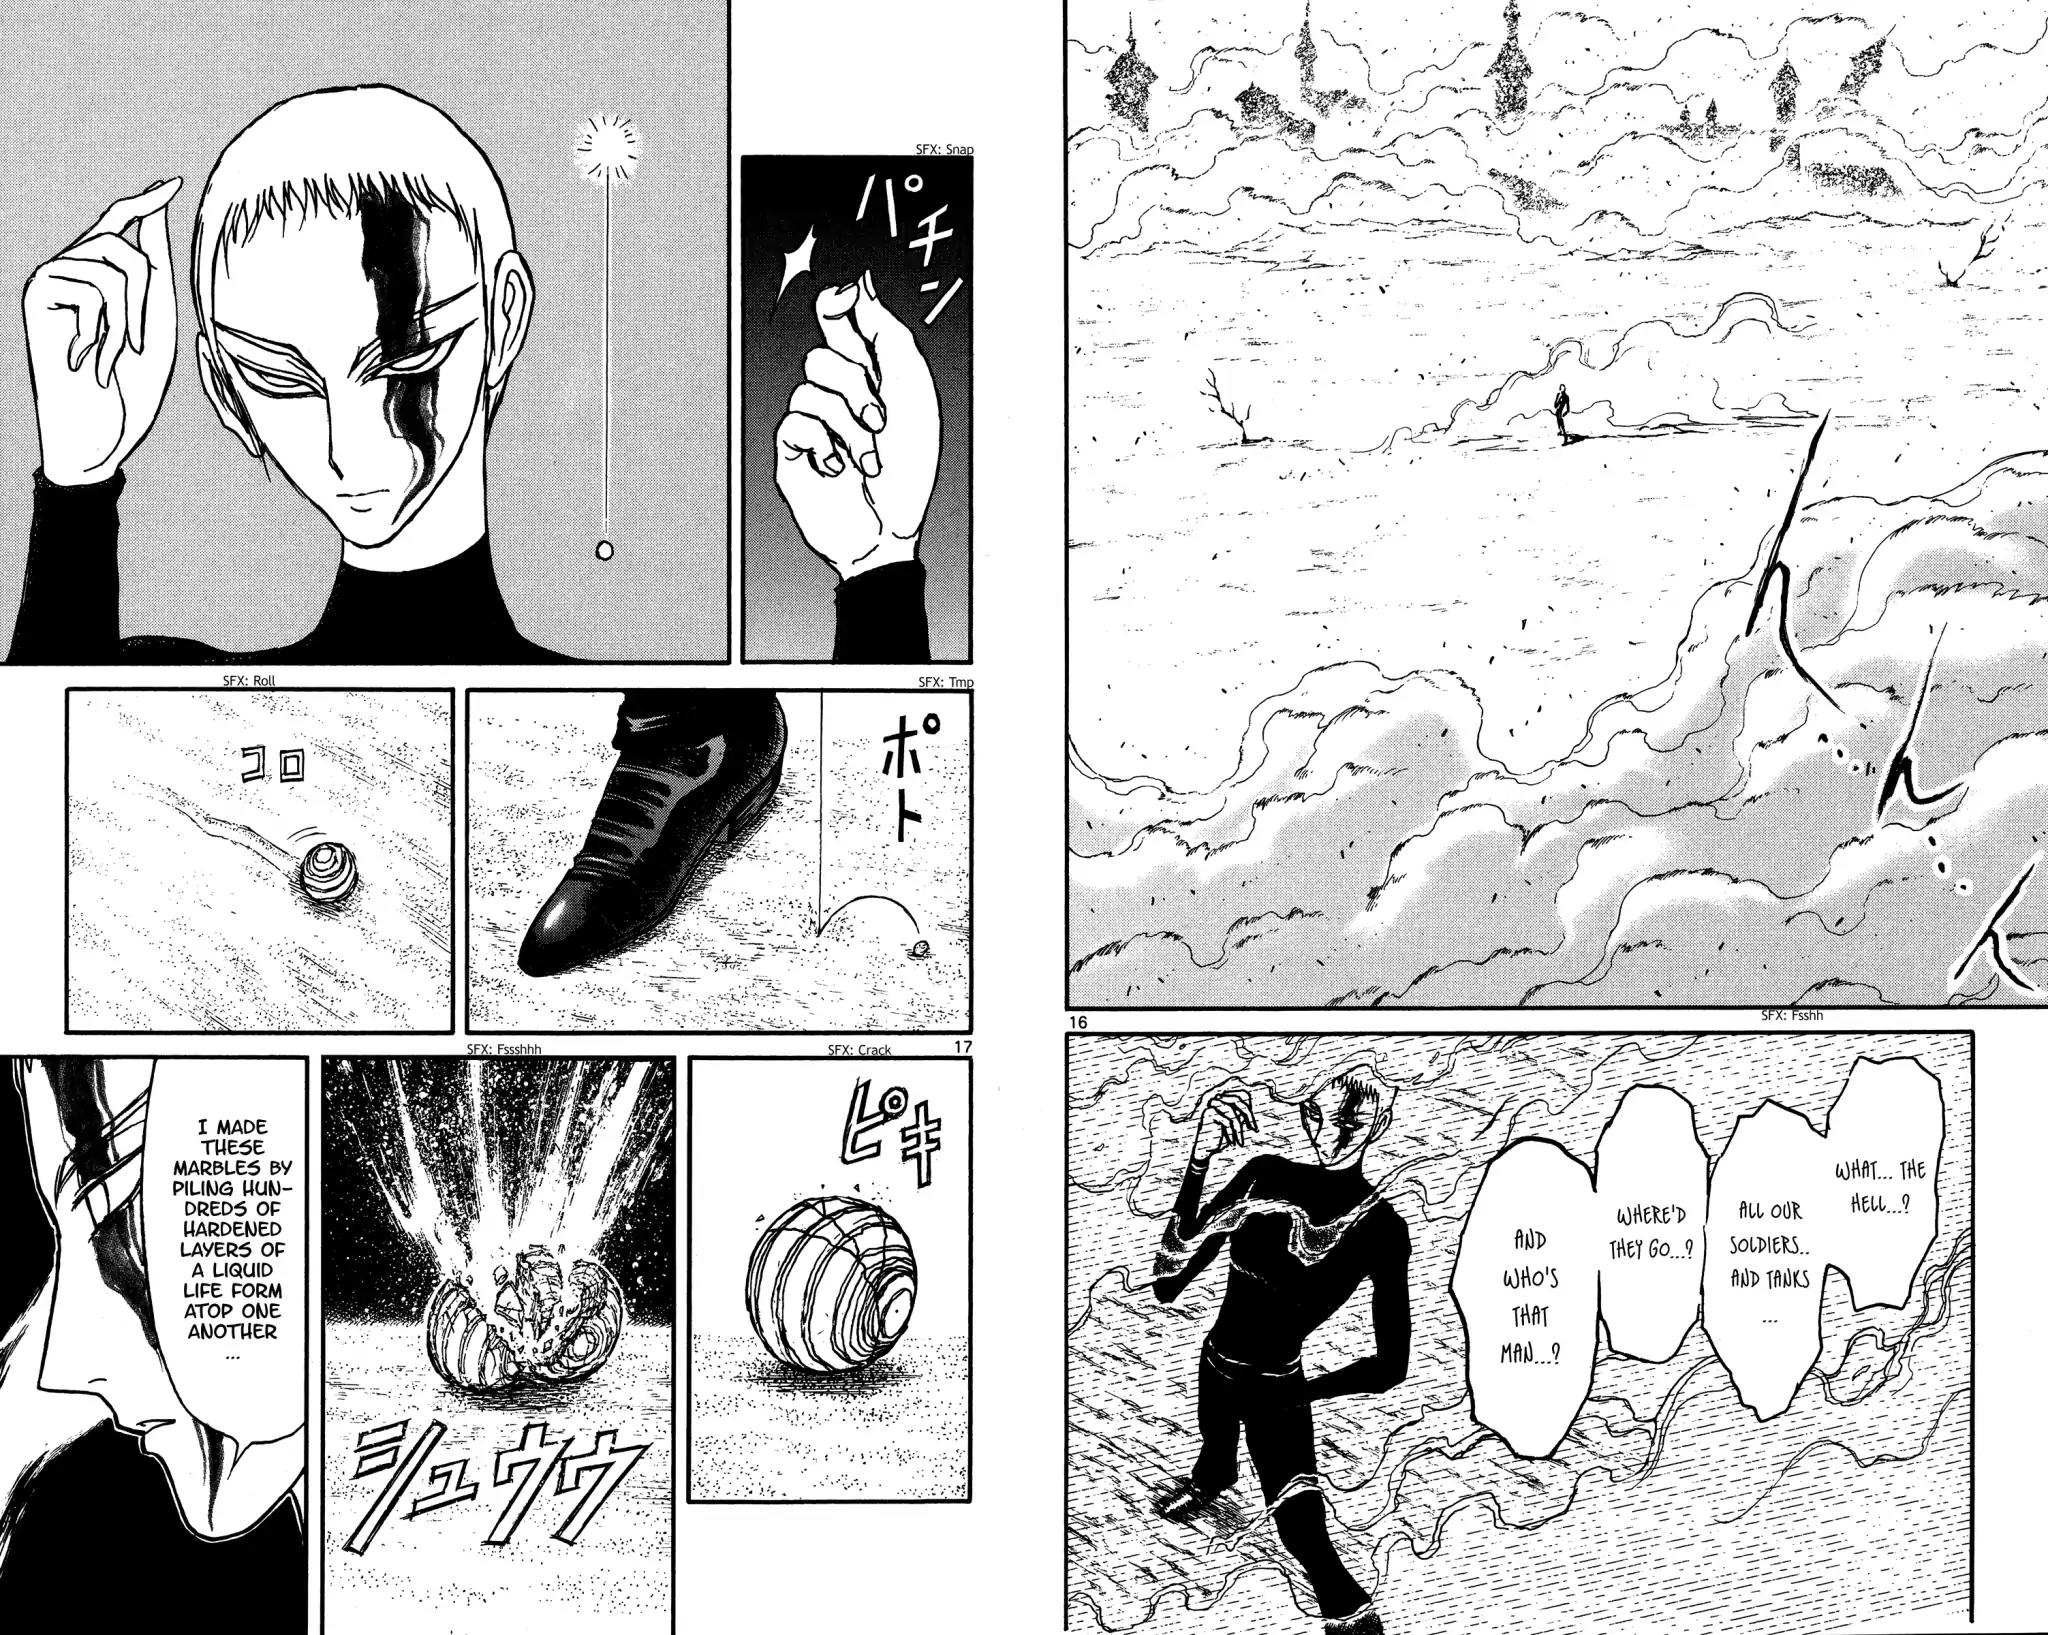 Souboutei Must Be Destroyed Chapter 138: